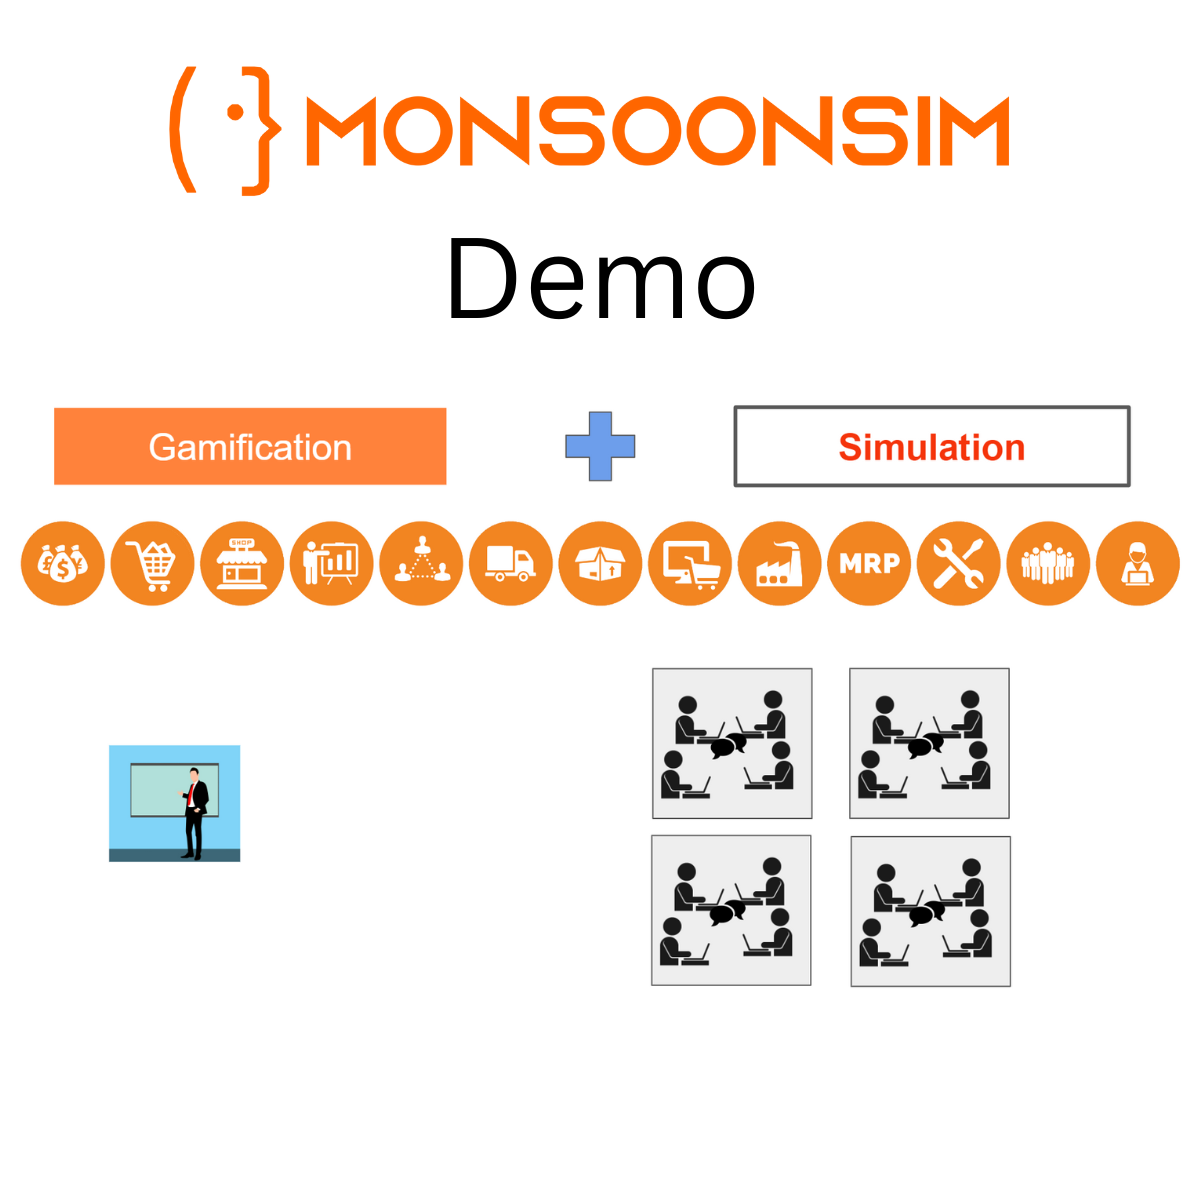 An informational graphic for MonsoonSIM, featuring the MonsoonSIM logo with the word 'Demo' below it. The image illustrates the combination of 'Gamification' and 'Simulation' elements within the MonsoonSIM platform. A series of icons represent various business modules, including finance, retail, warehouse, and MRP (Material Requirement Planning), highlighting the diverse areas covered in the simulation. Below, there are images depicting groups of people engaging in collaborative activities around tables, symbolizing team collaboration and experiential learning opportunities offered by MonsoonSIM